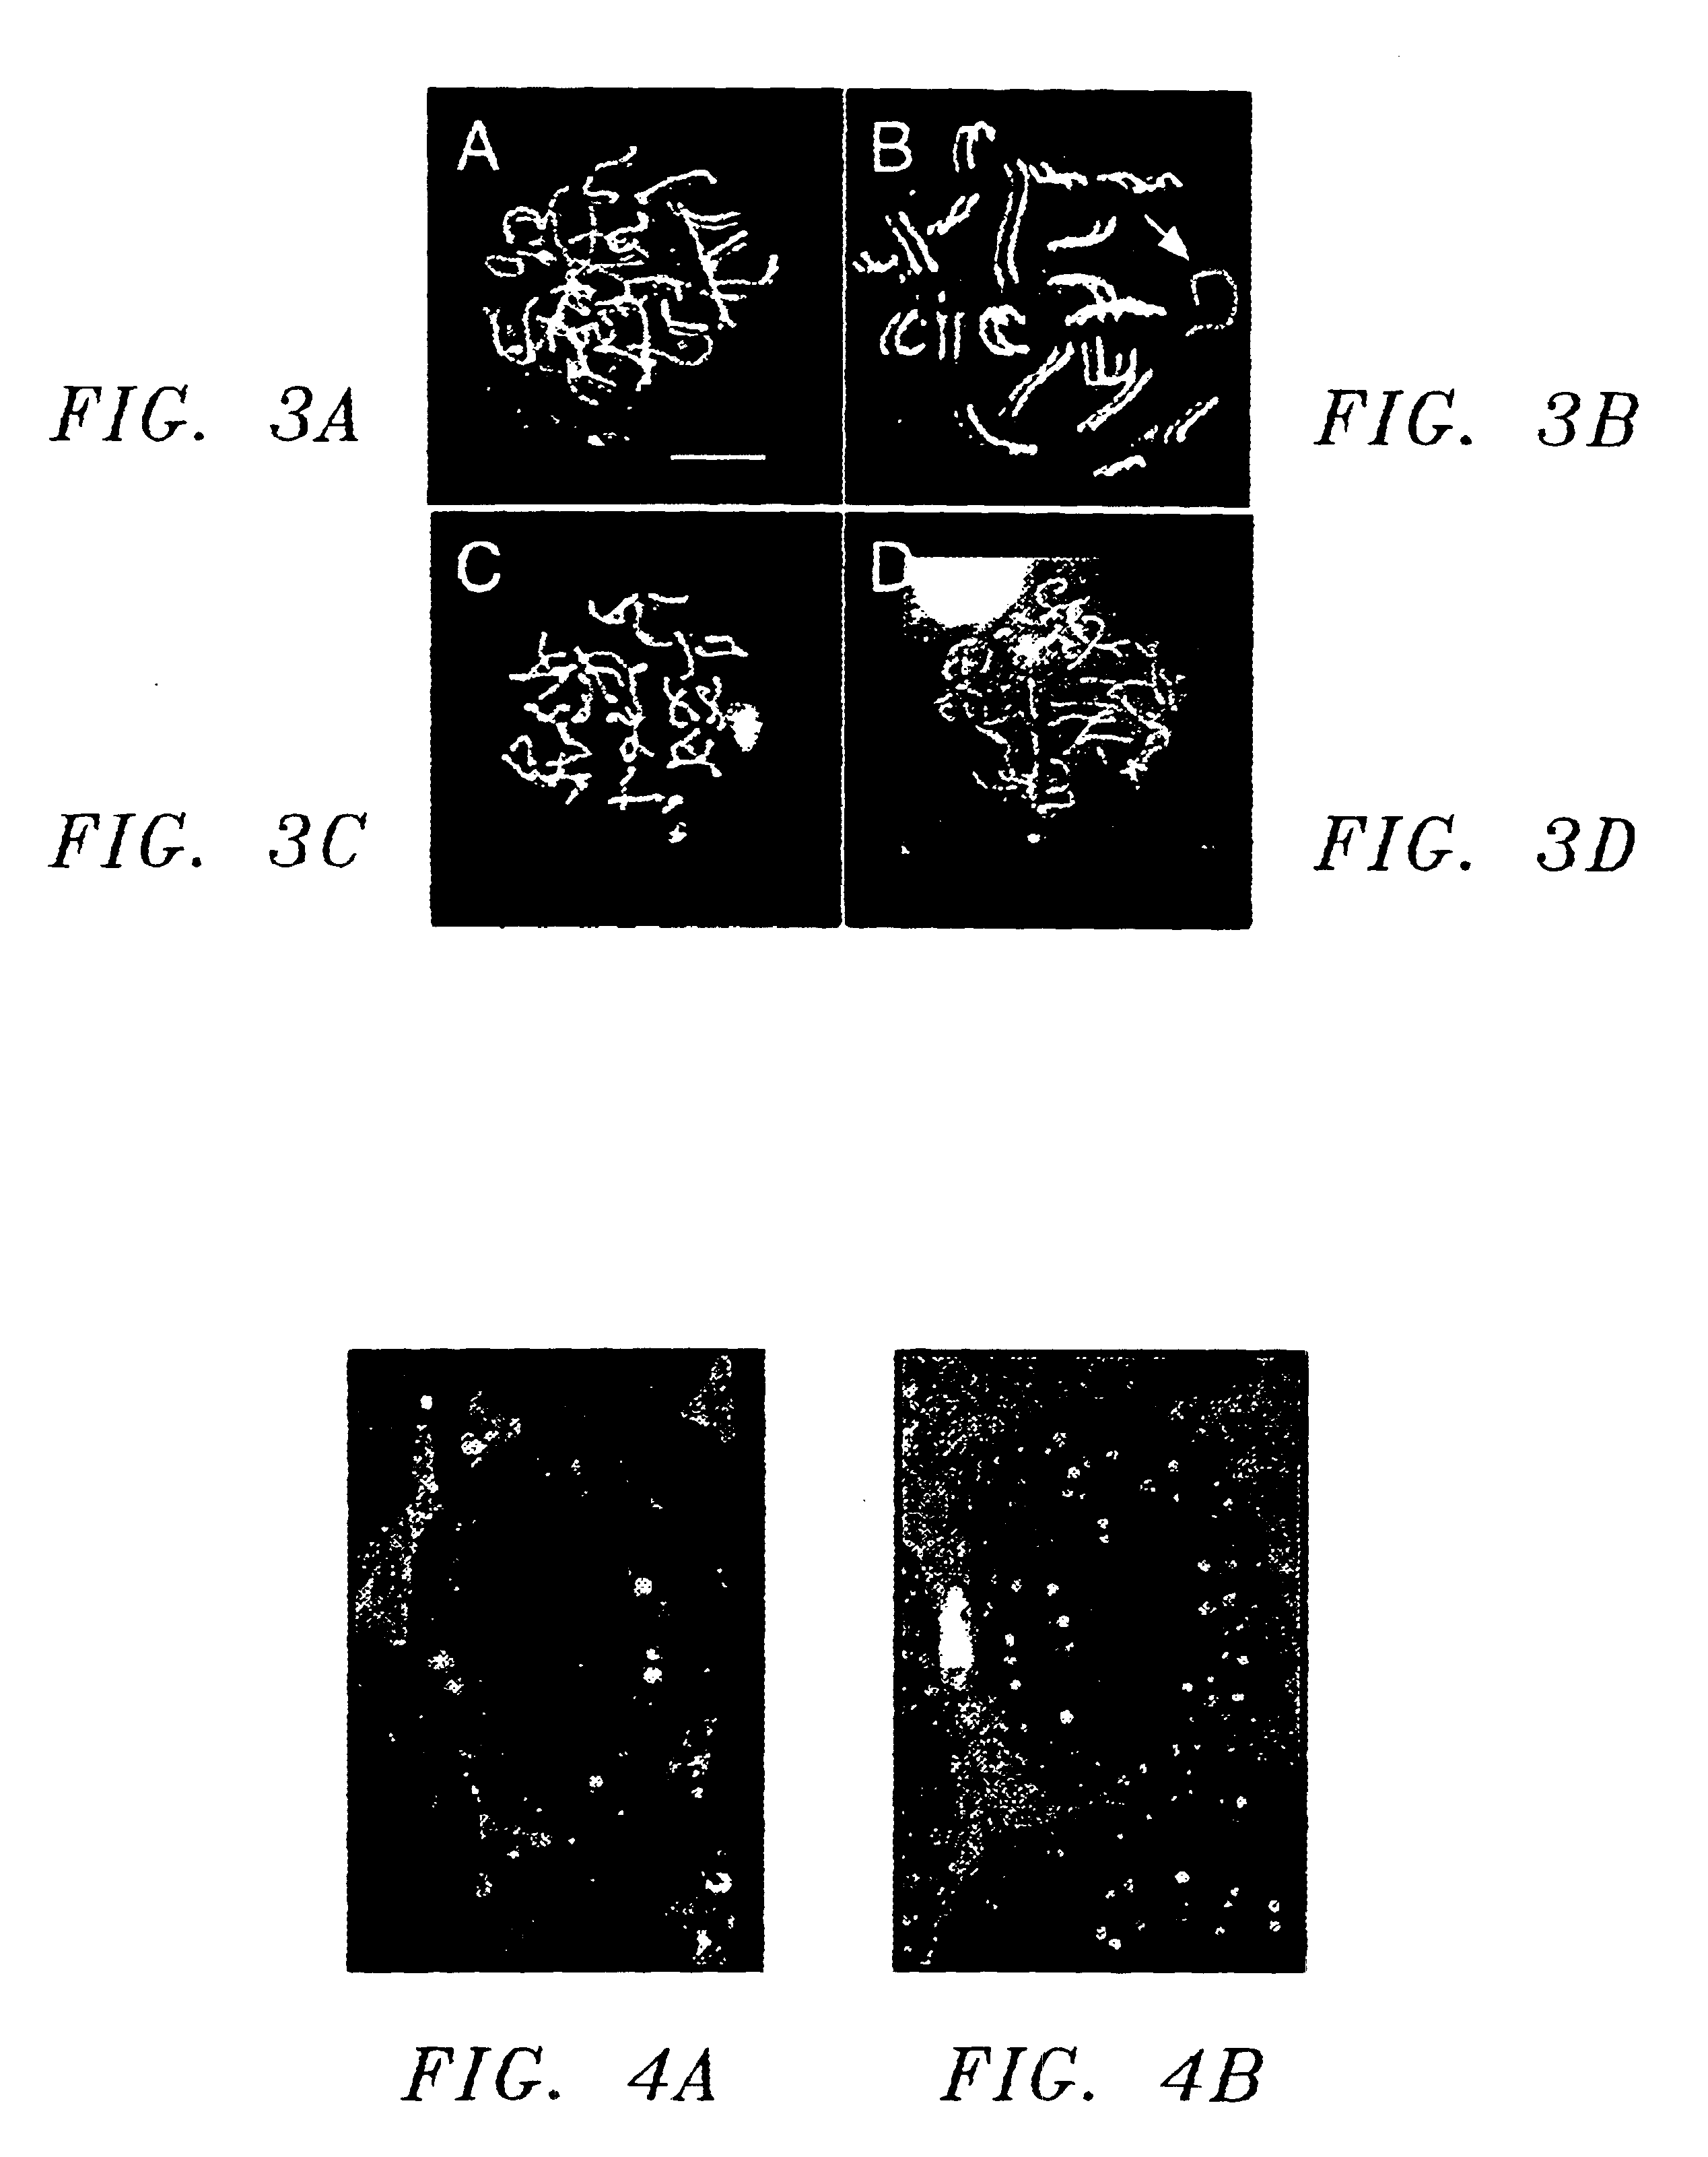 MORC gene compositions and methods of use